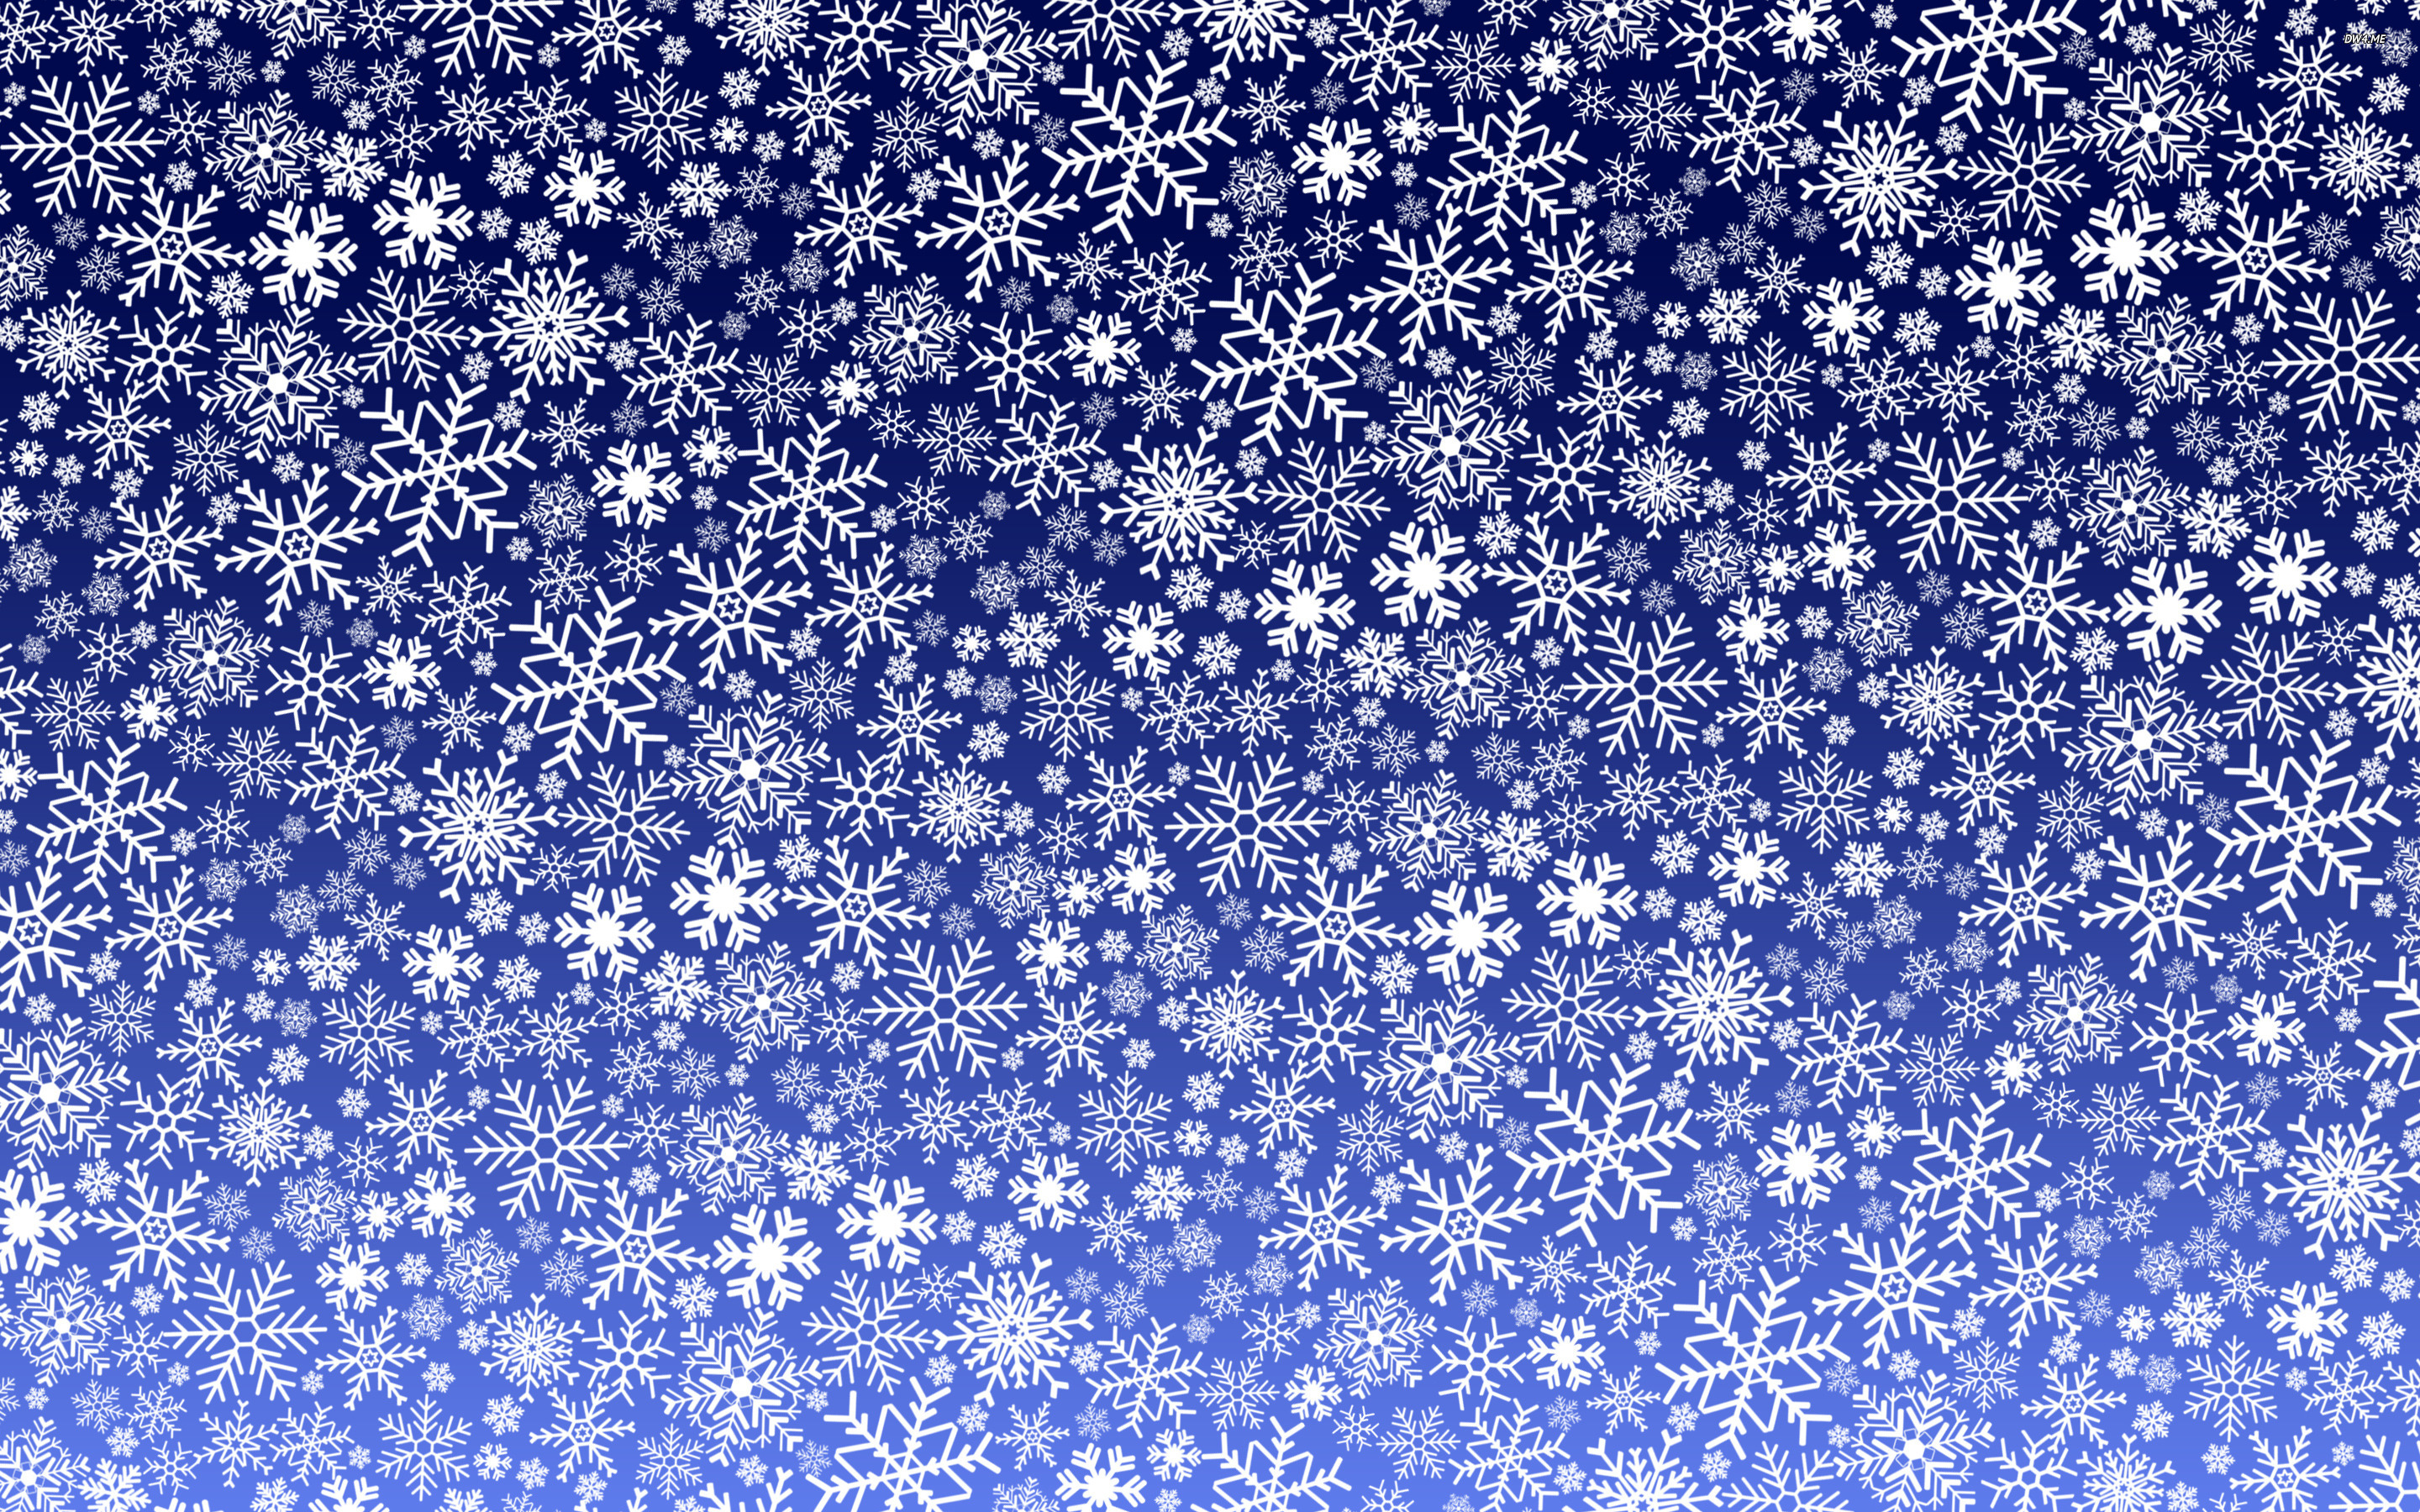 Snowflake White Snow Flake Crystal Winter Blue Background Wallpaper Image  For Free Download  Pngtree